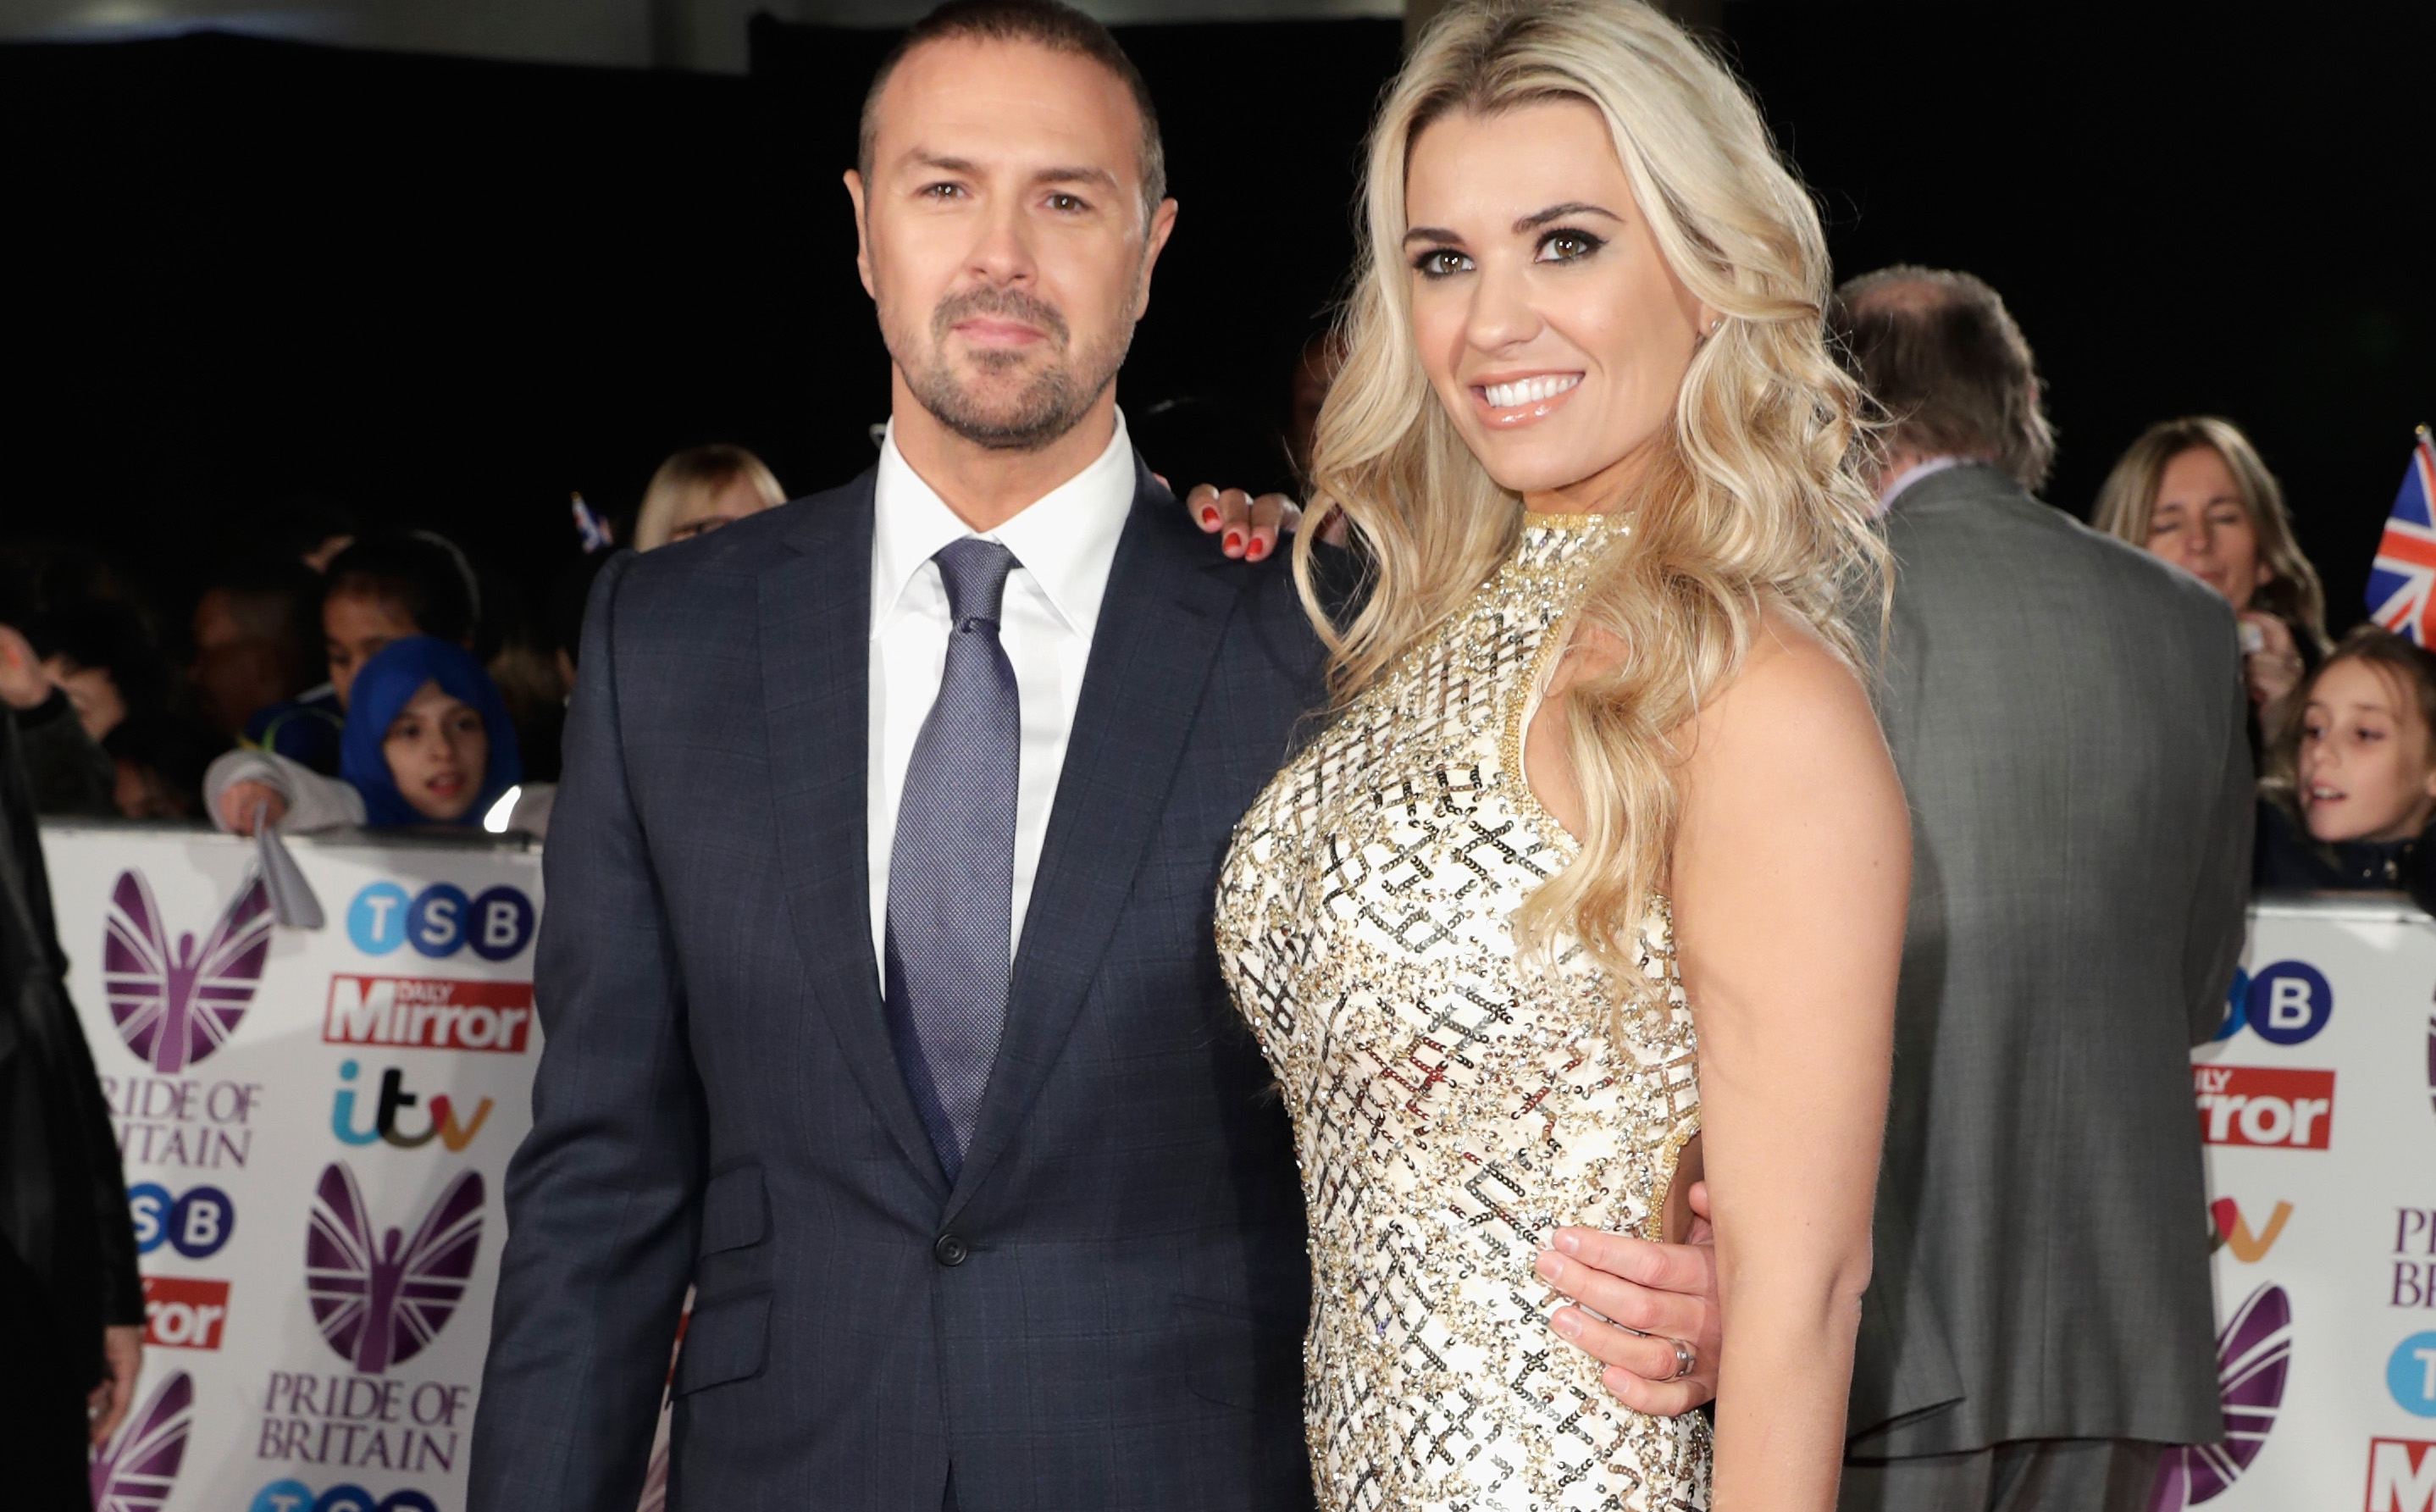 Paddy McGuinness says raising children with autism has strained his marriage